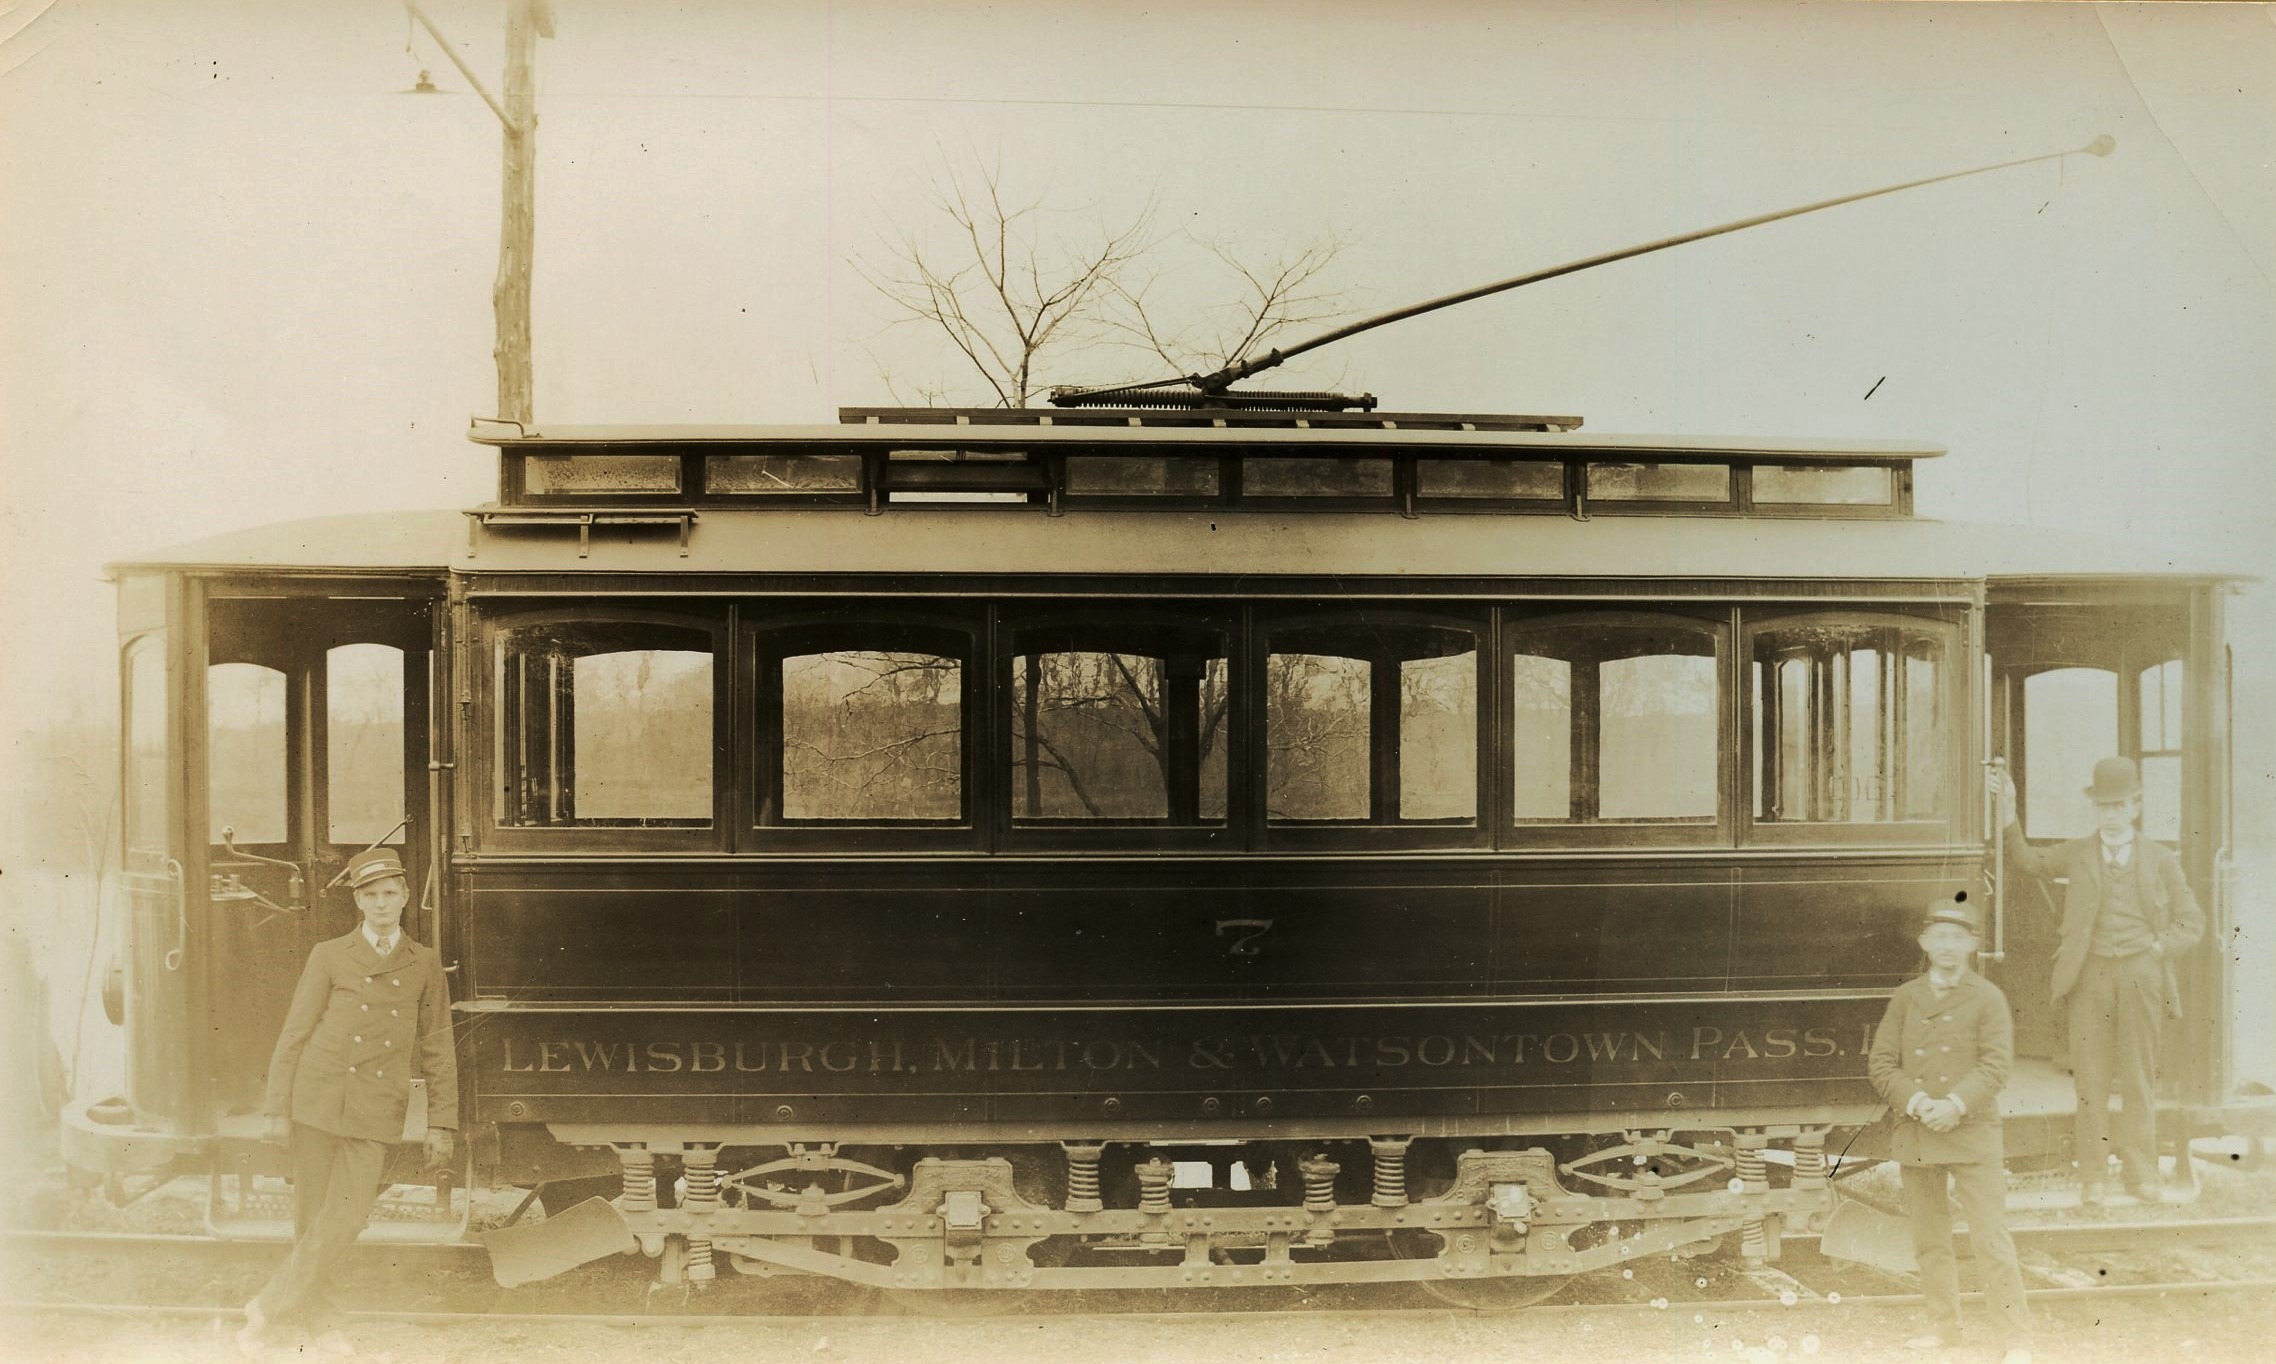 Lewisburgh, Milton and Watsontown Passenger Railway | Milton, Pennsylvania | Birney trolley car | 1898 | North Jersey Chapter NRHS Collection